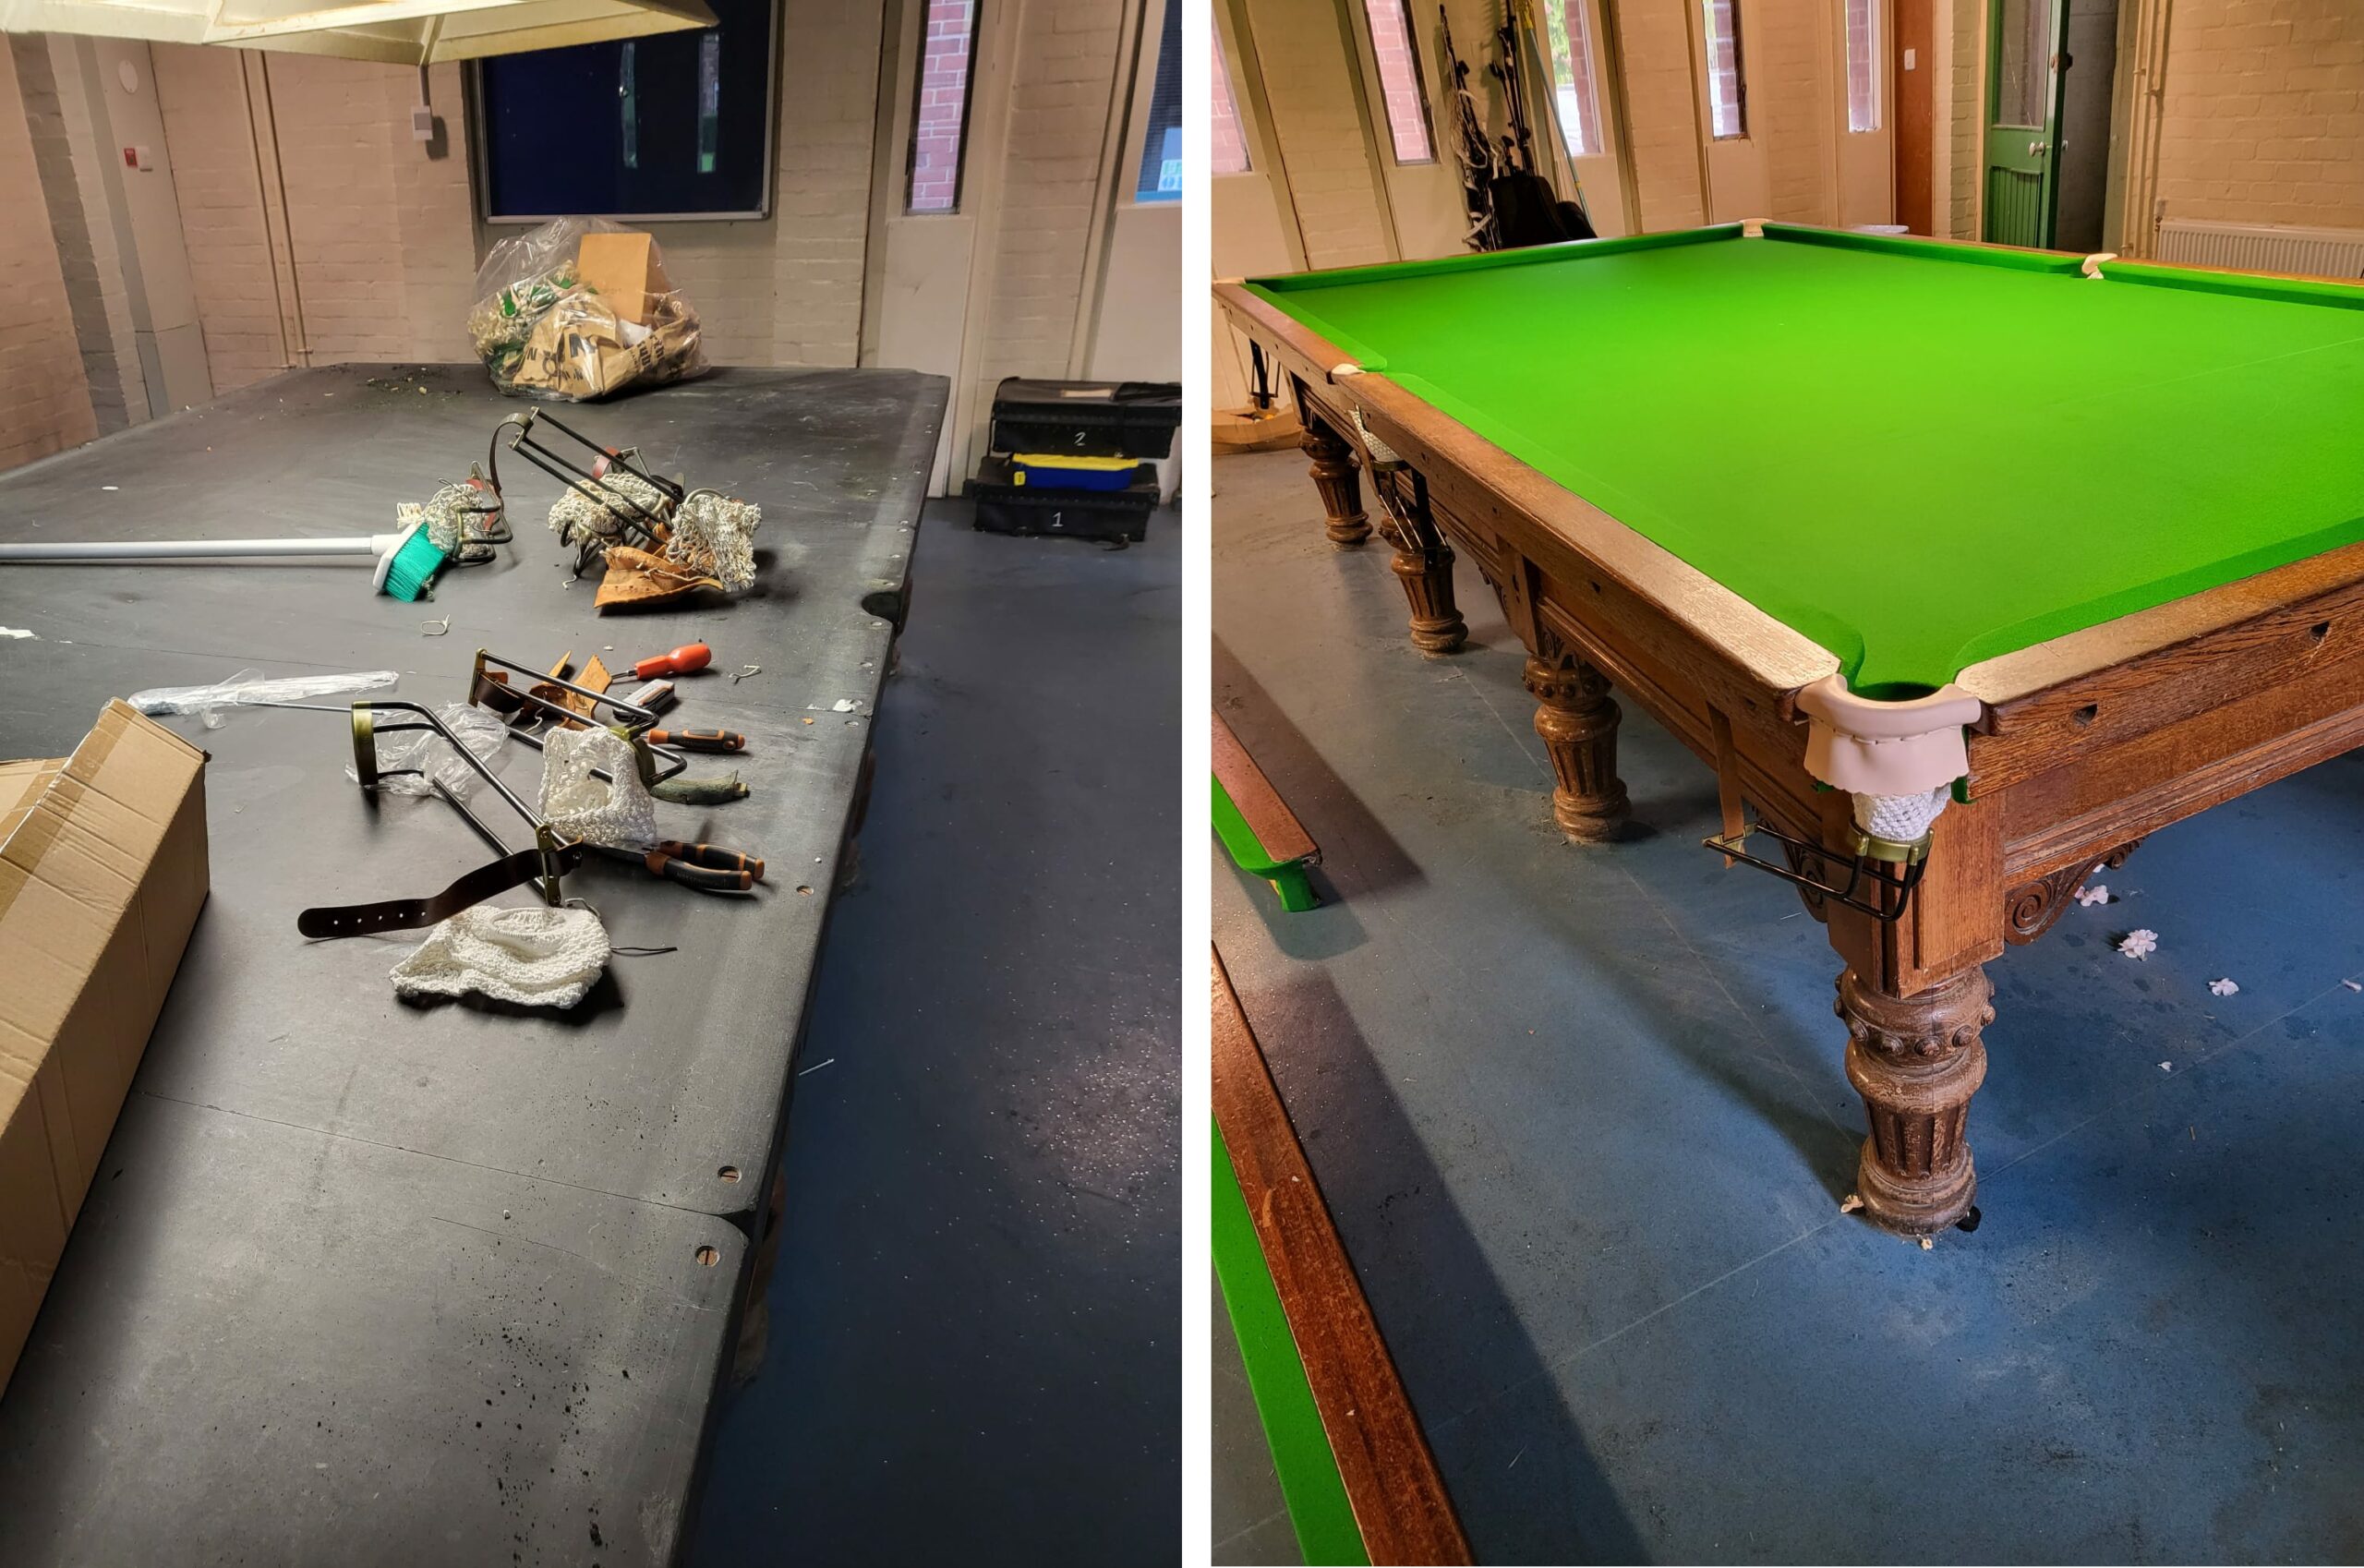 snooker table recovering